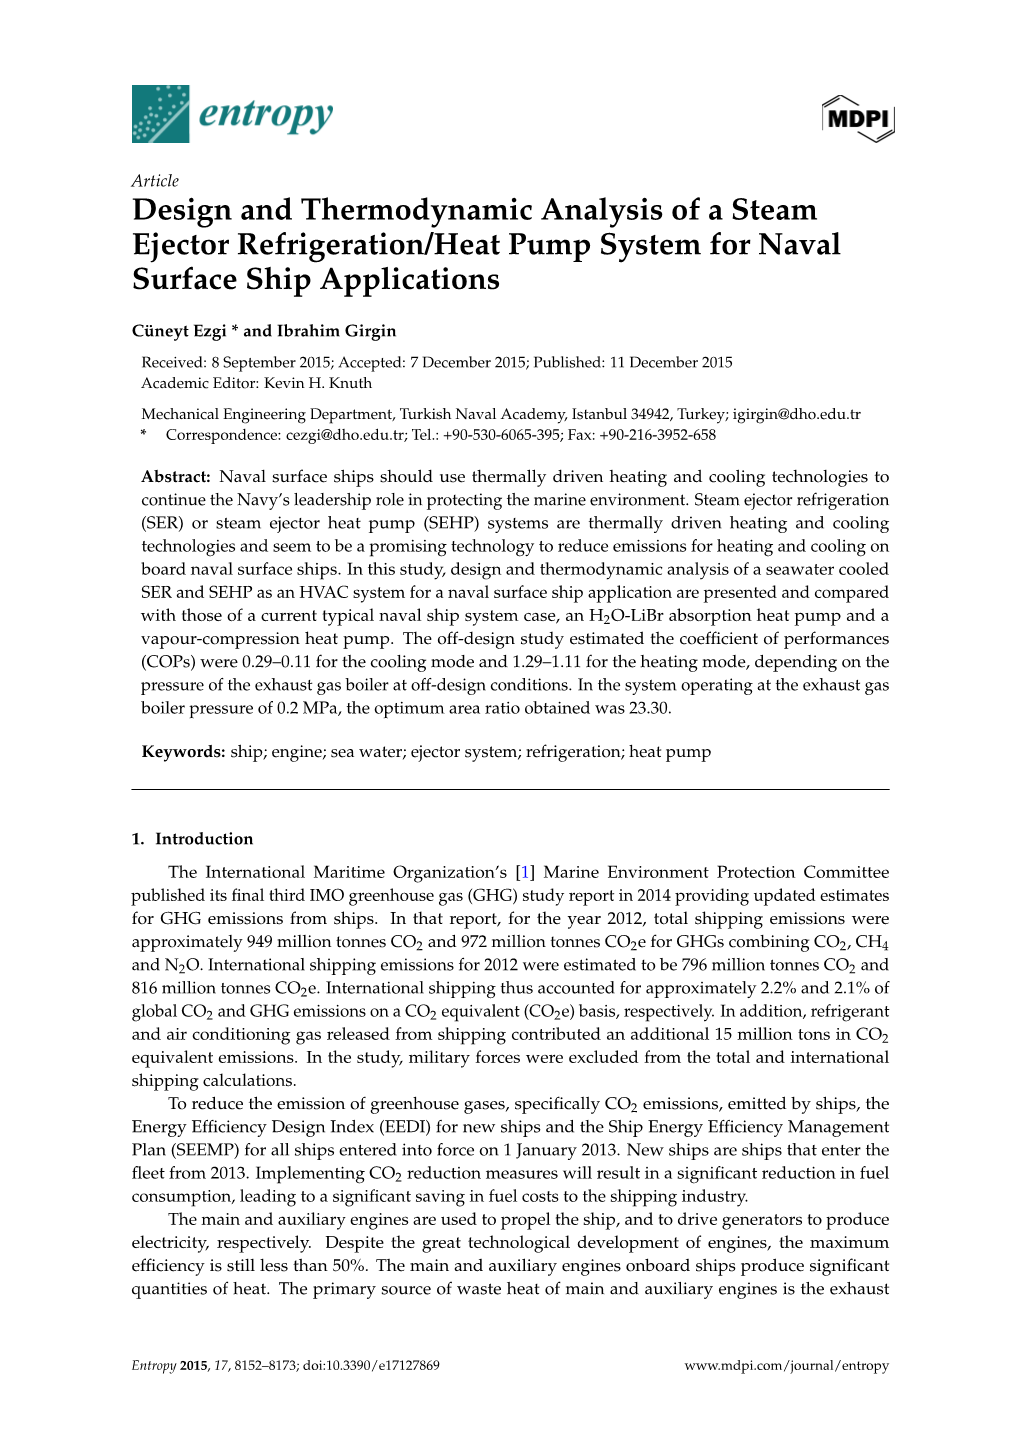 Design and Thermodynamic Analysis of a Steam Ejector Refrigeration/Heat Pump System for Naval Surface Ship Applications